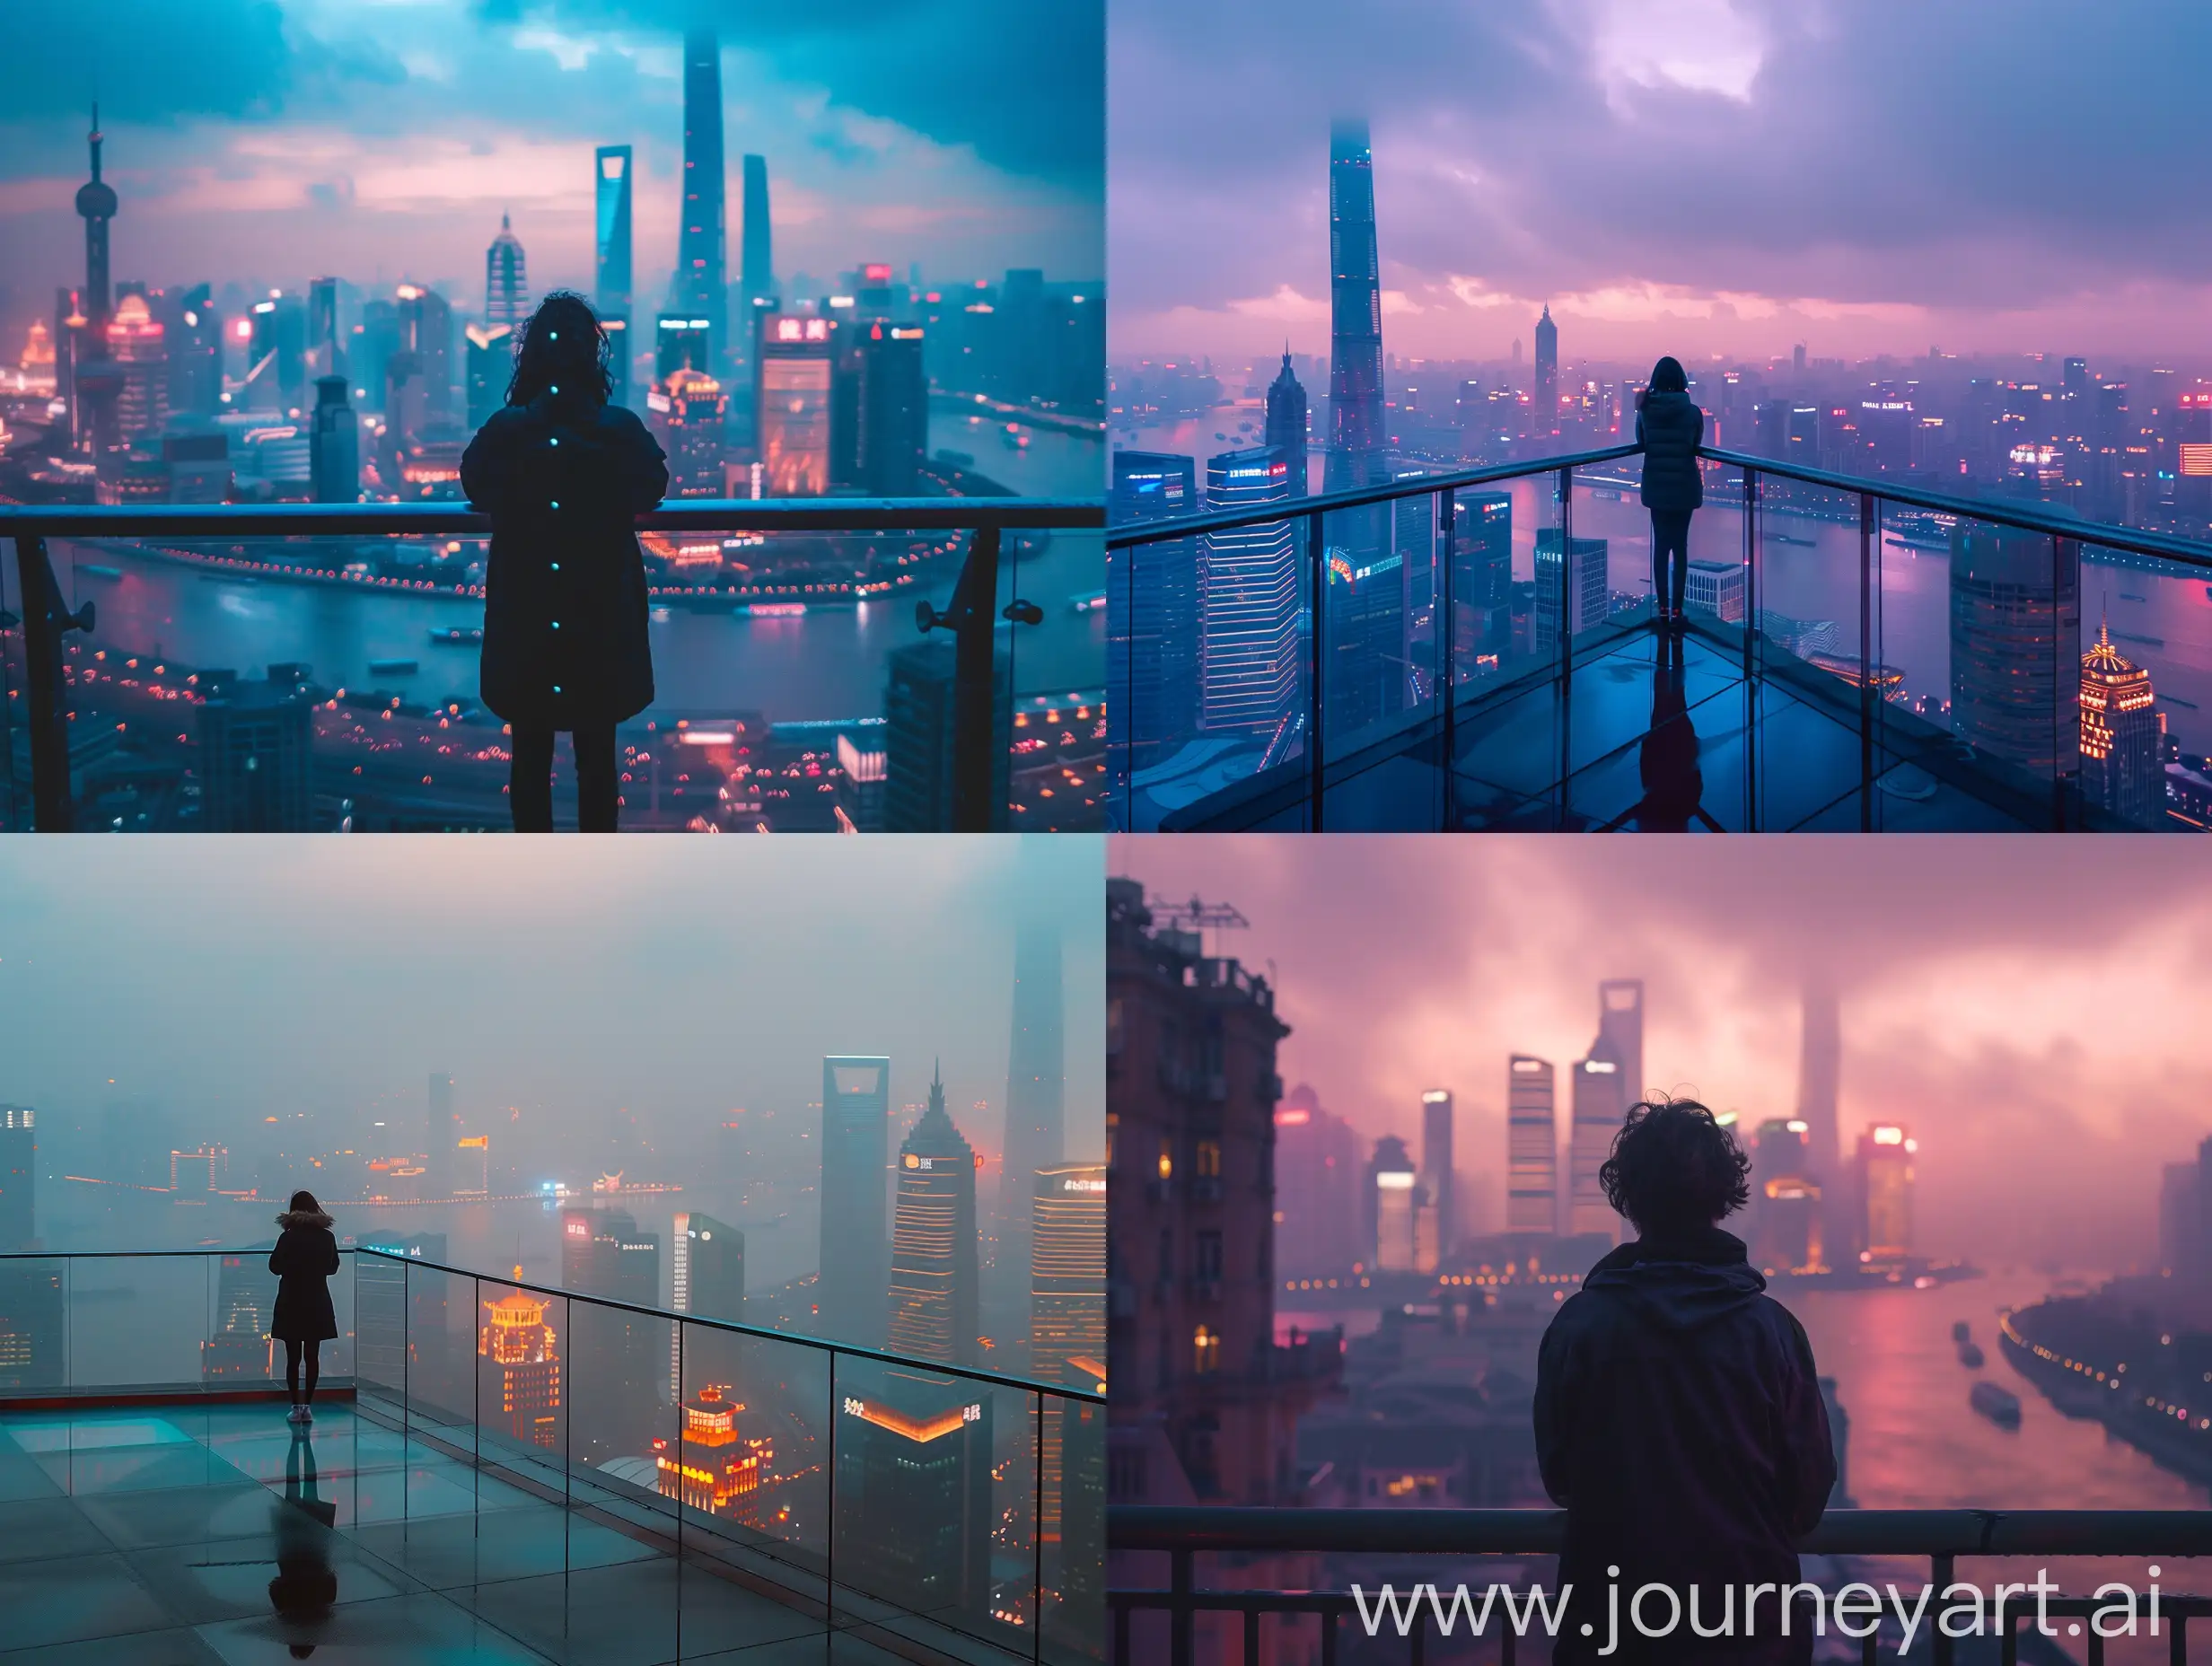  photo of a person standing on the balcony, soft lighting, style raw posted on reddit in 2019,, environment, looking at a city, shanghai